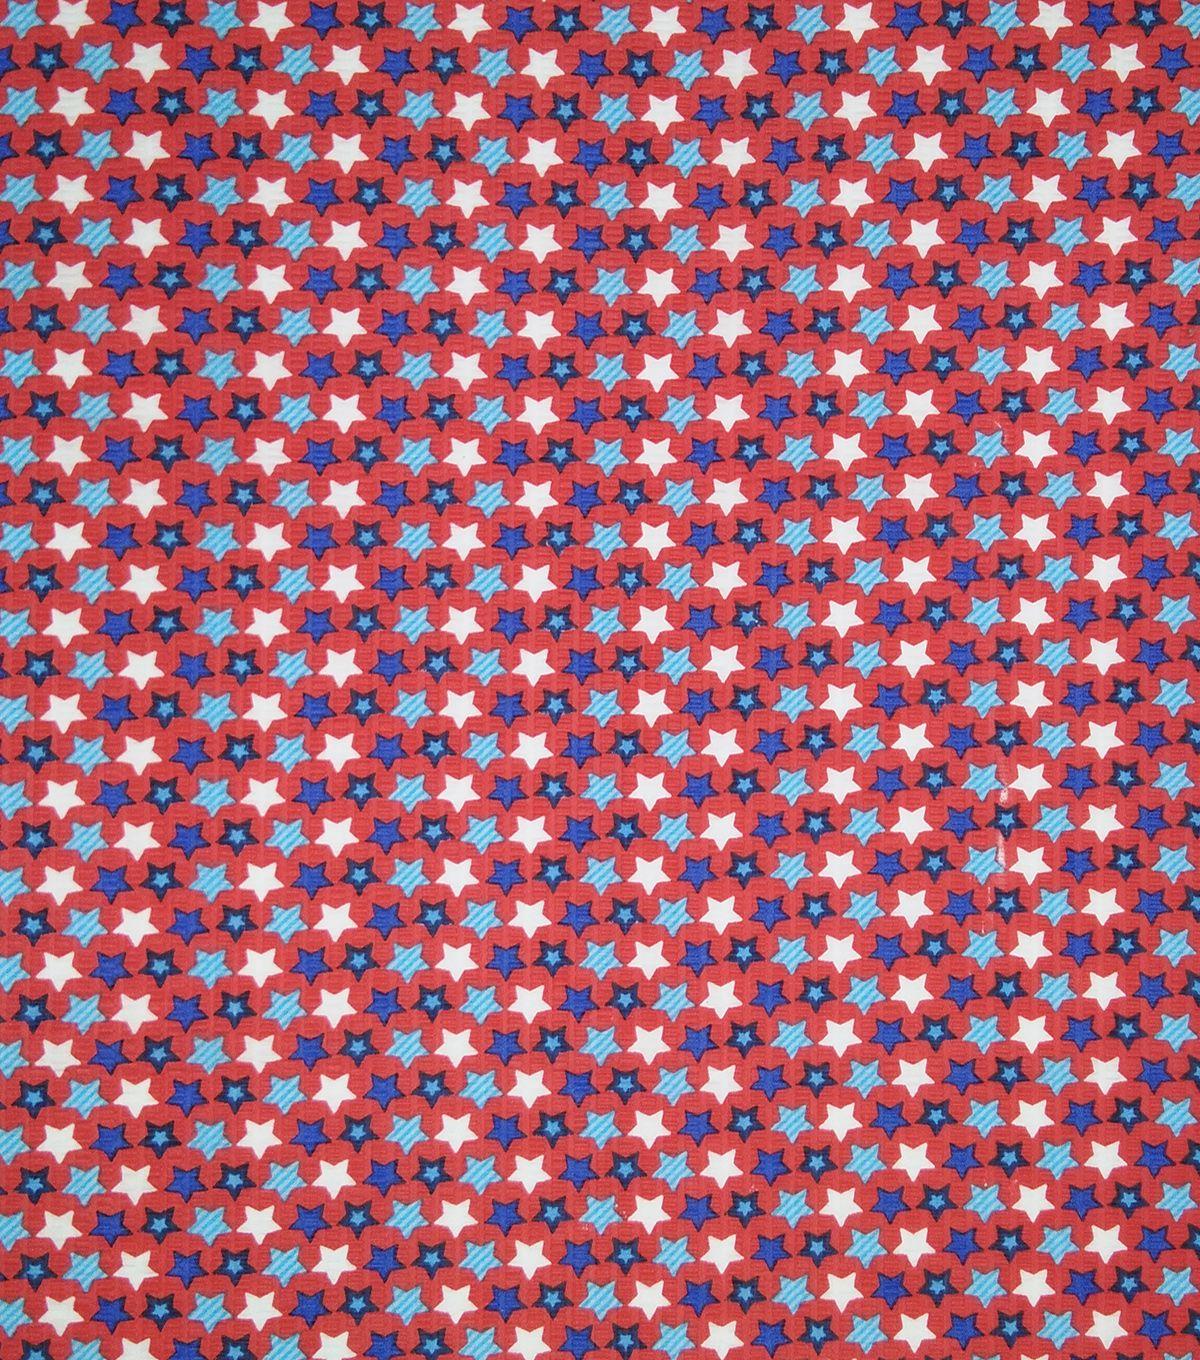 Cool Red White and Blue Star Logo - Doodles Textured Fabric 43''-Red, White & Blue Star Spangled | JOANN